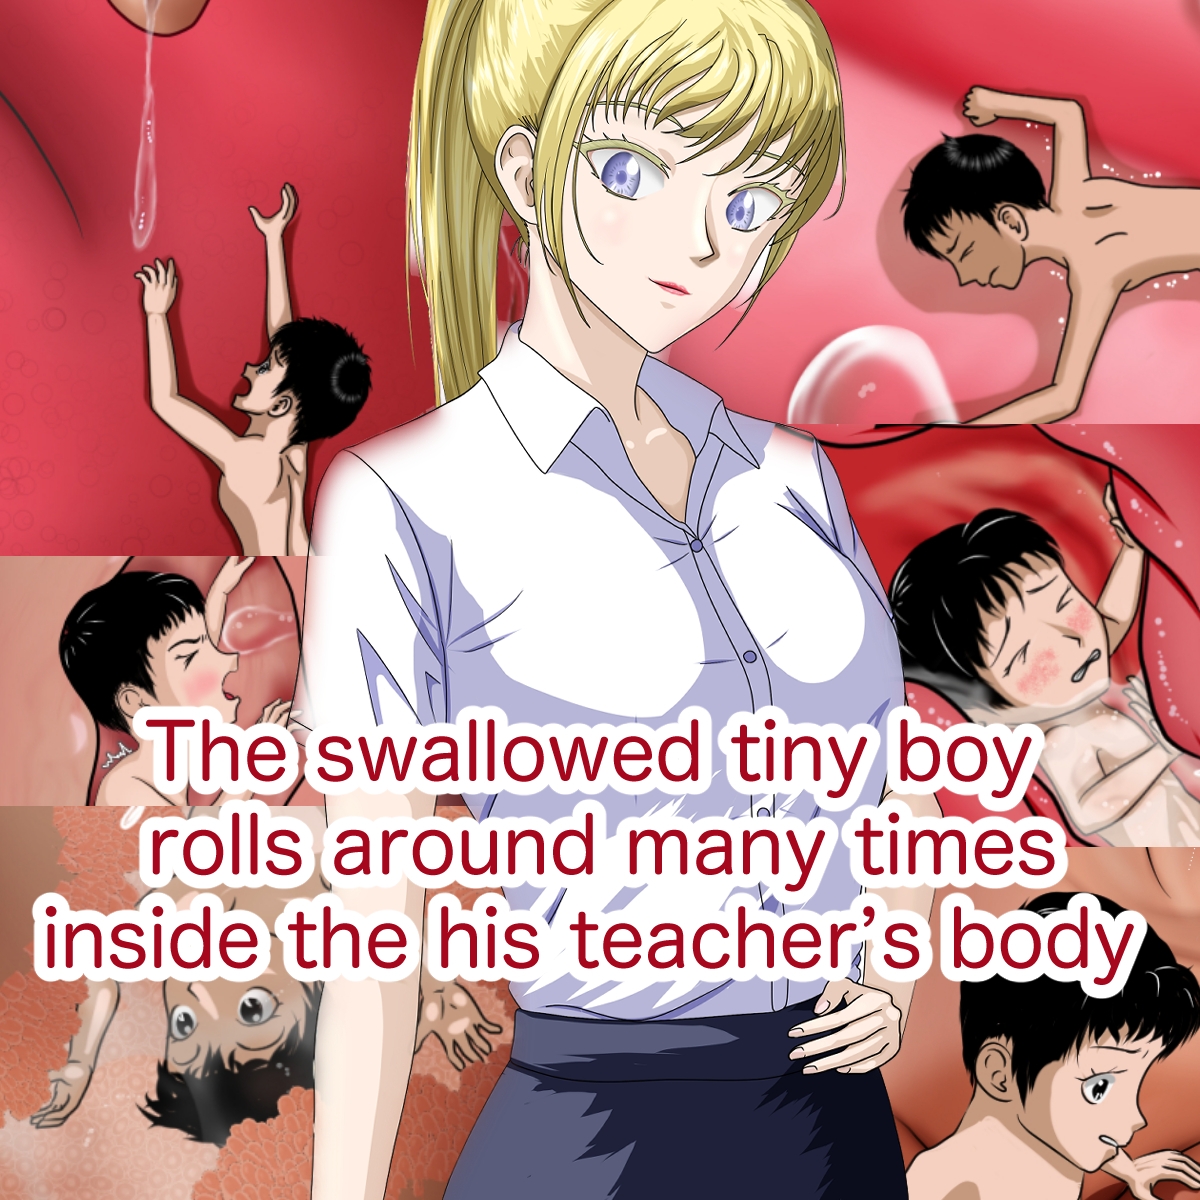 A story about a boy who is shrunk down and swallowed by his teacher